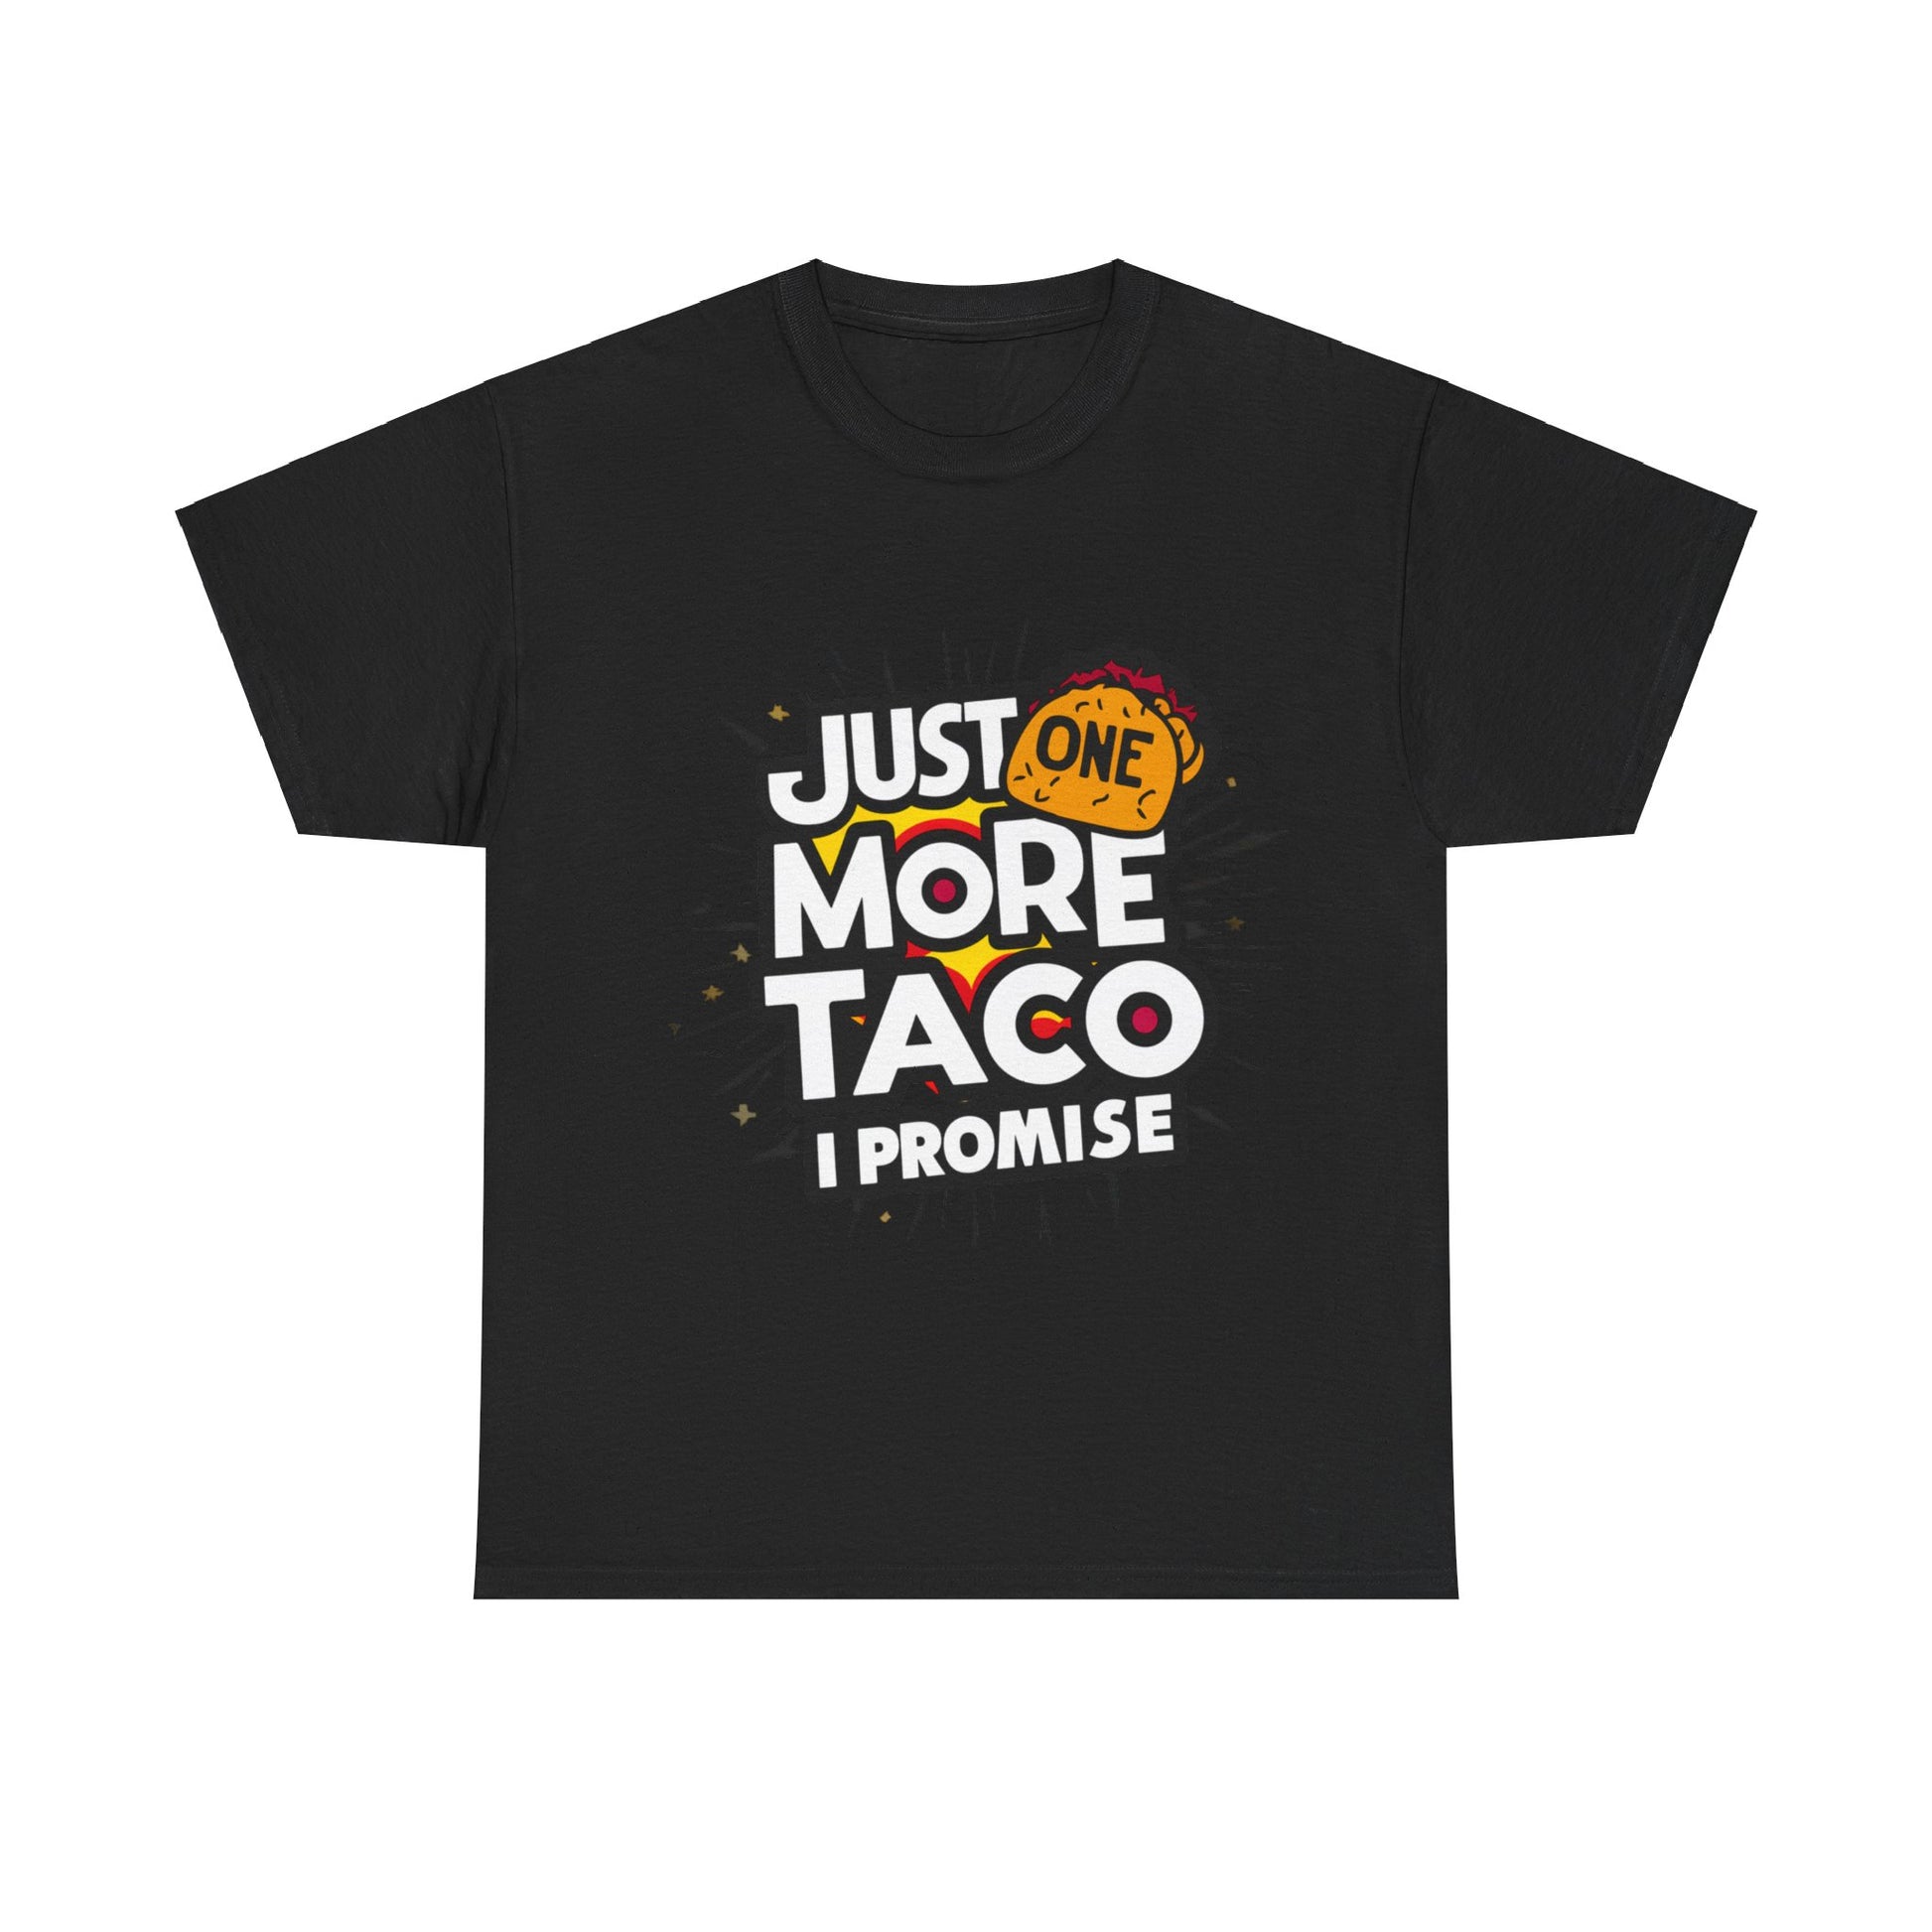 Copy of Just One More Taco I Promise Mexican Food Graphic Unisex Heavy Cotton Tee Cotton Funny Humorous Graphic Soft Premium Unisex Men Women Black T-shirt Birthday Gift-1